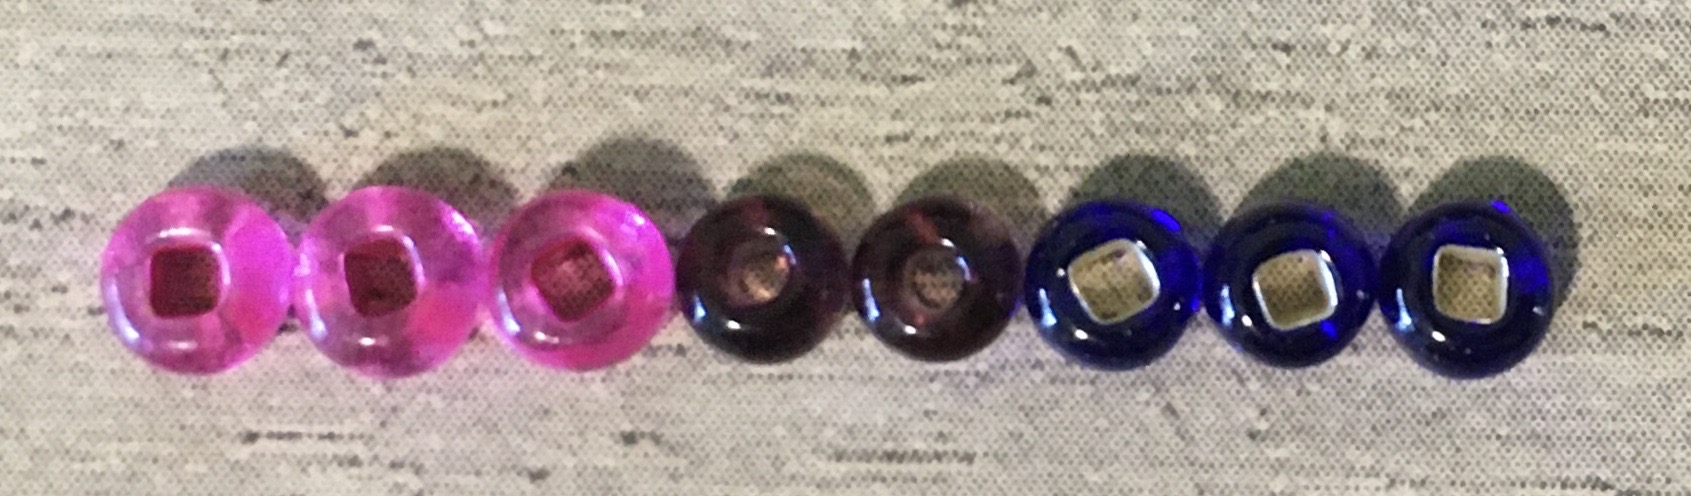 Beads lined up